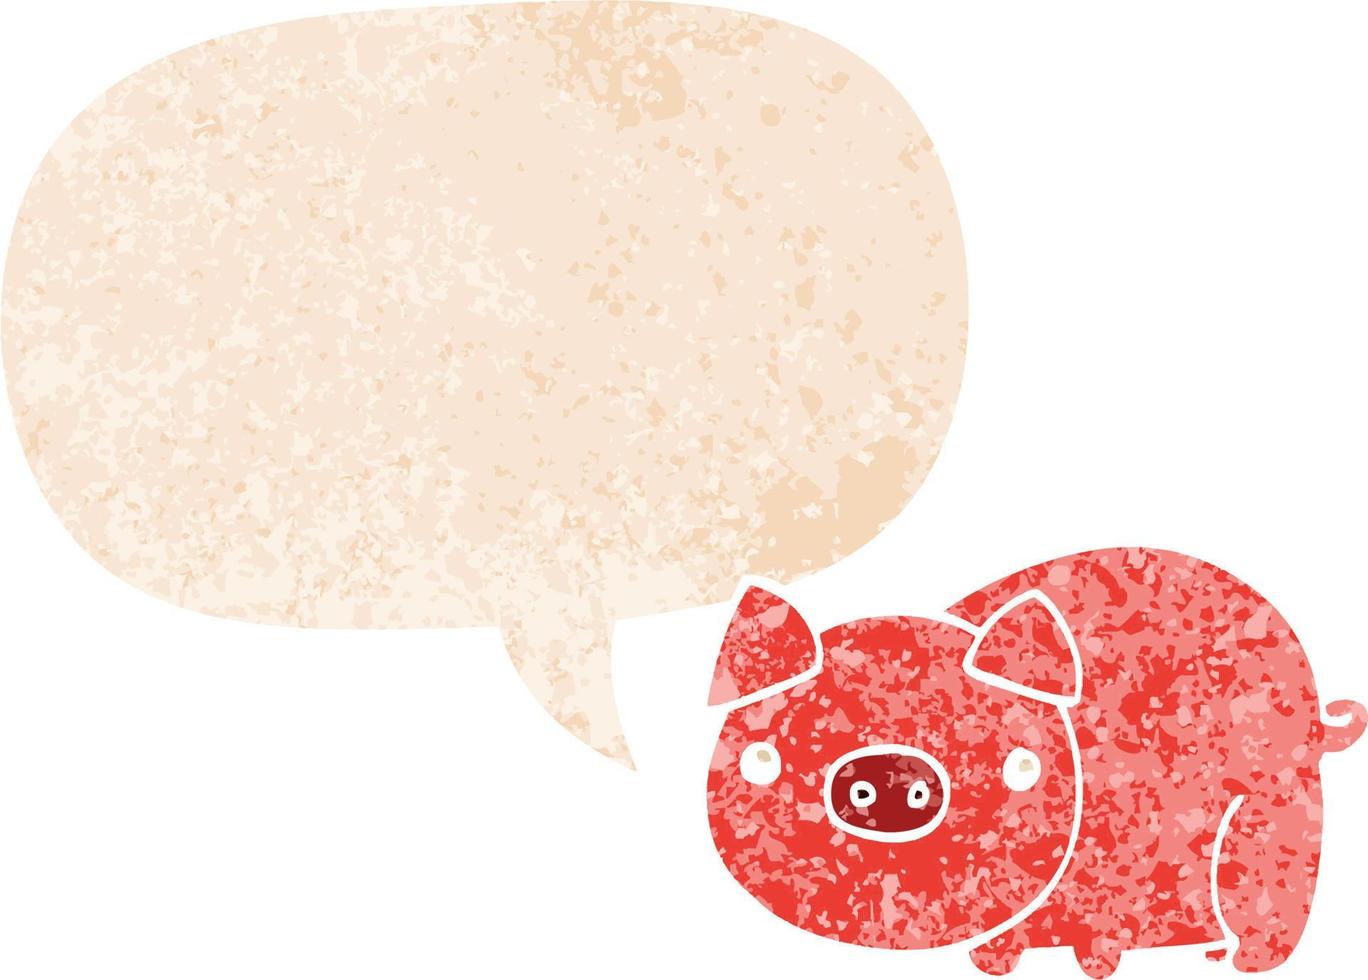 cartoon pig and speech bubble in retro textured style vector